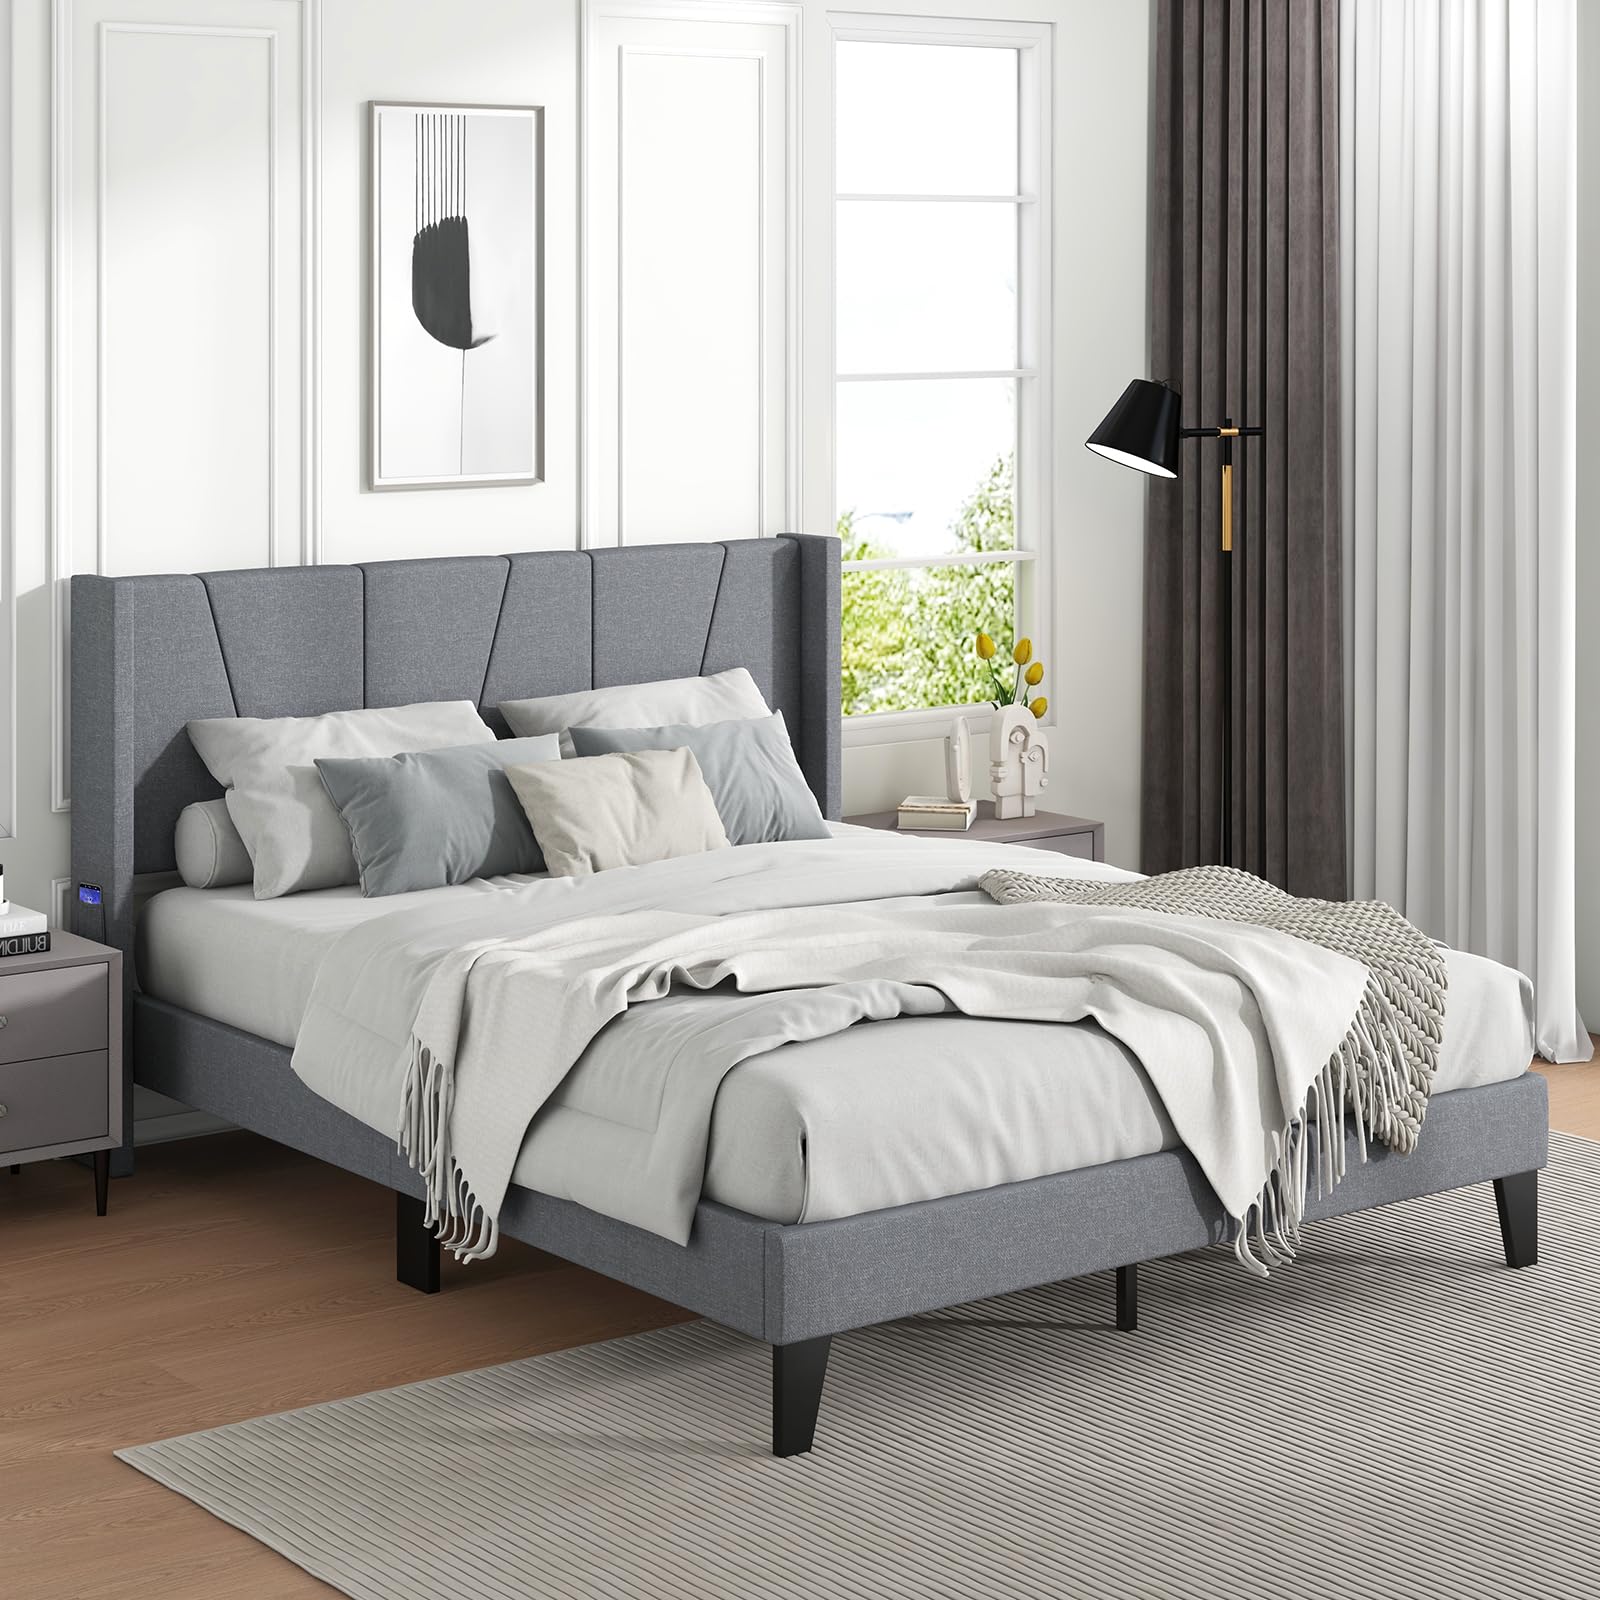 Giantex Bed Frame with Wingback Headboard